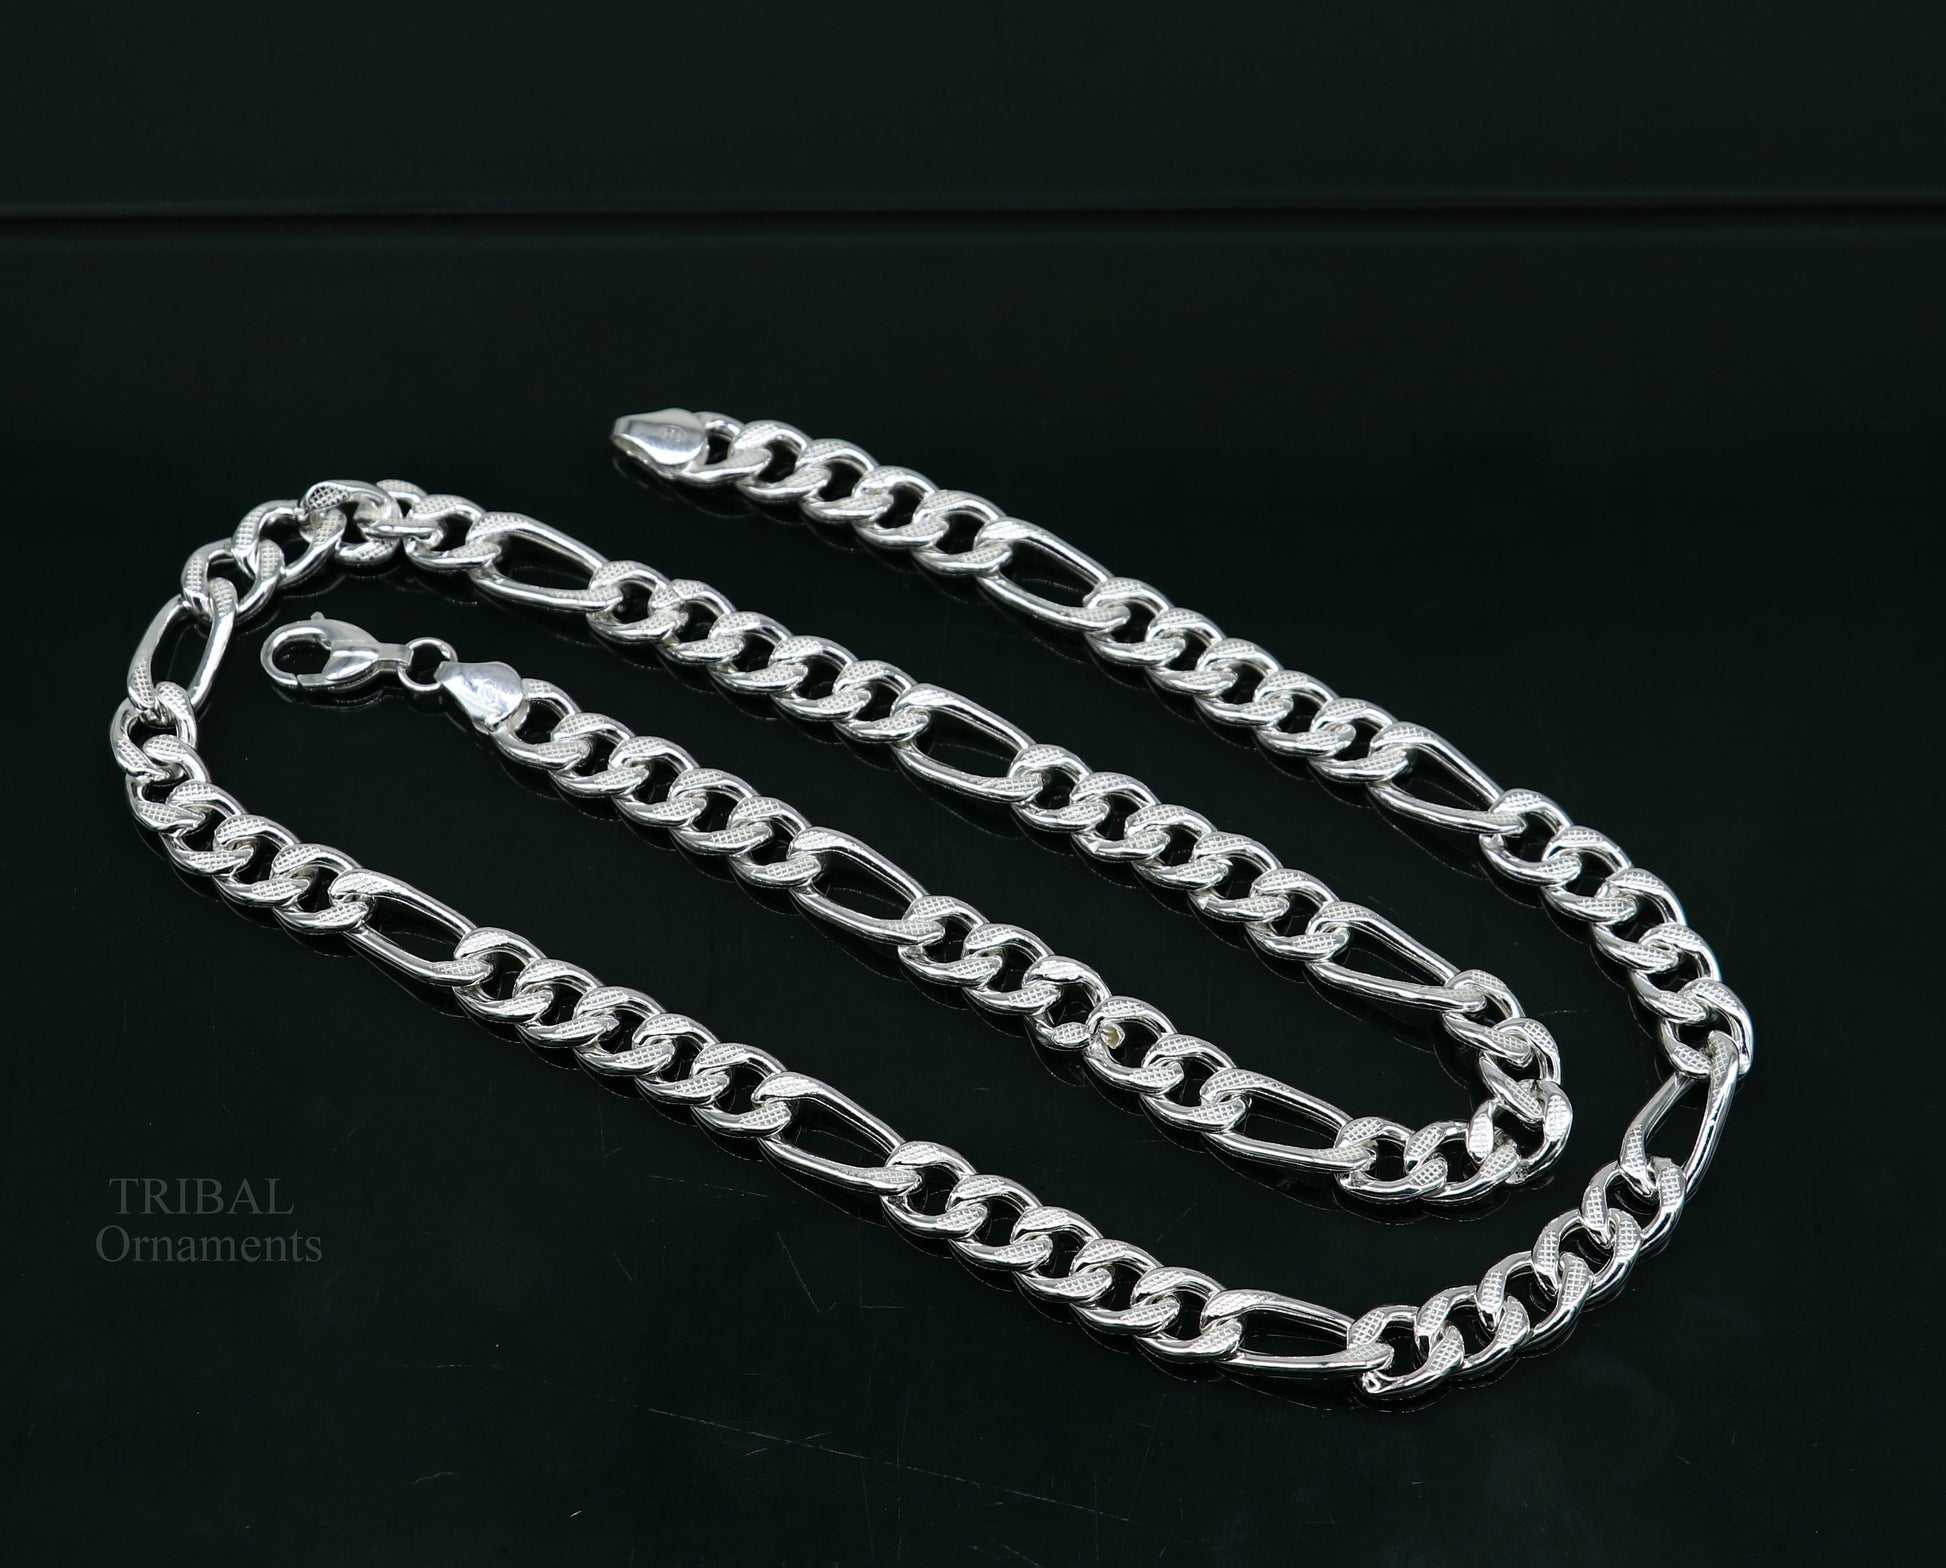 20.5" 925 sterling silver 5mm handmade amazing Figaro chain necklace excellent gifting jewelry, new fancy style men's chain necklace  nch338 - TRIBAL ORNAMENTS